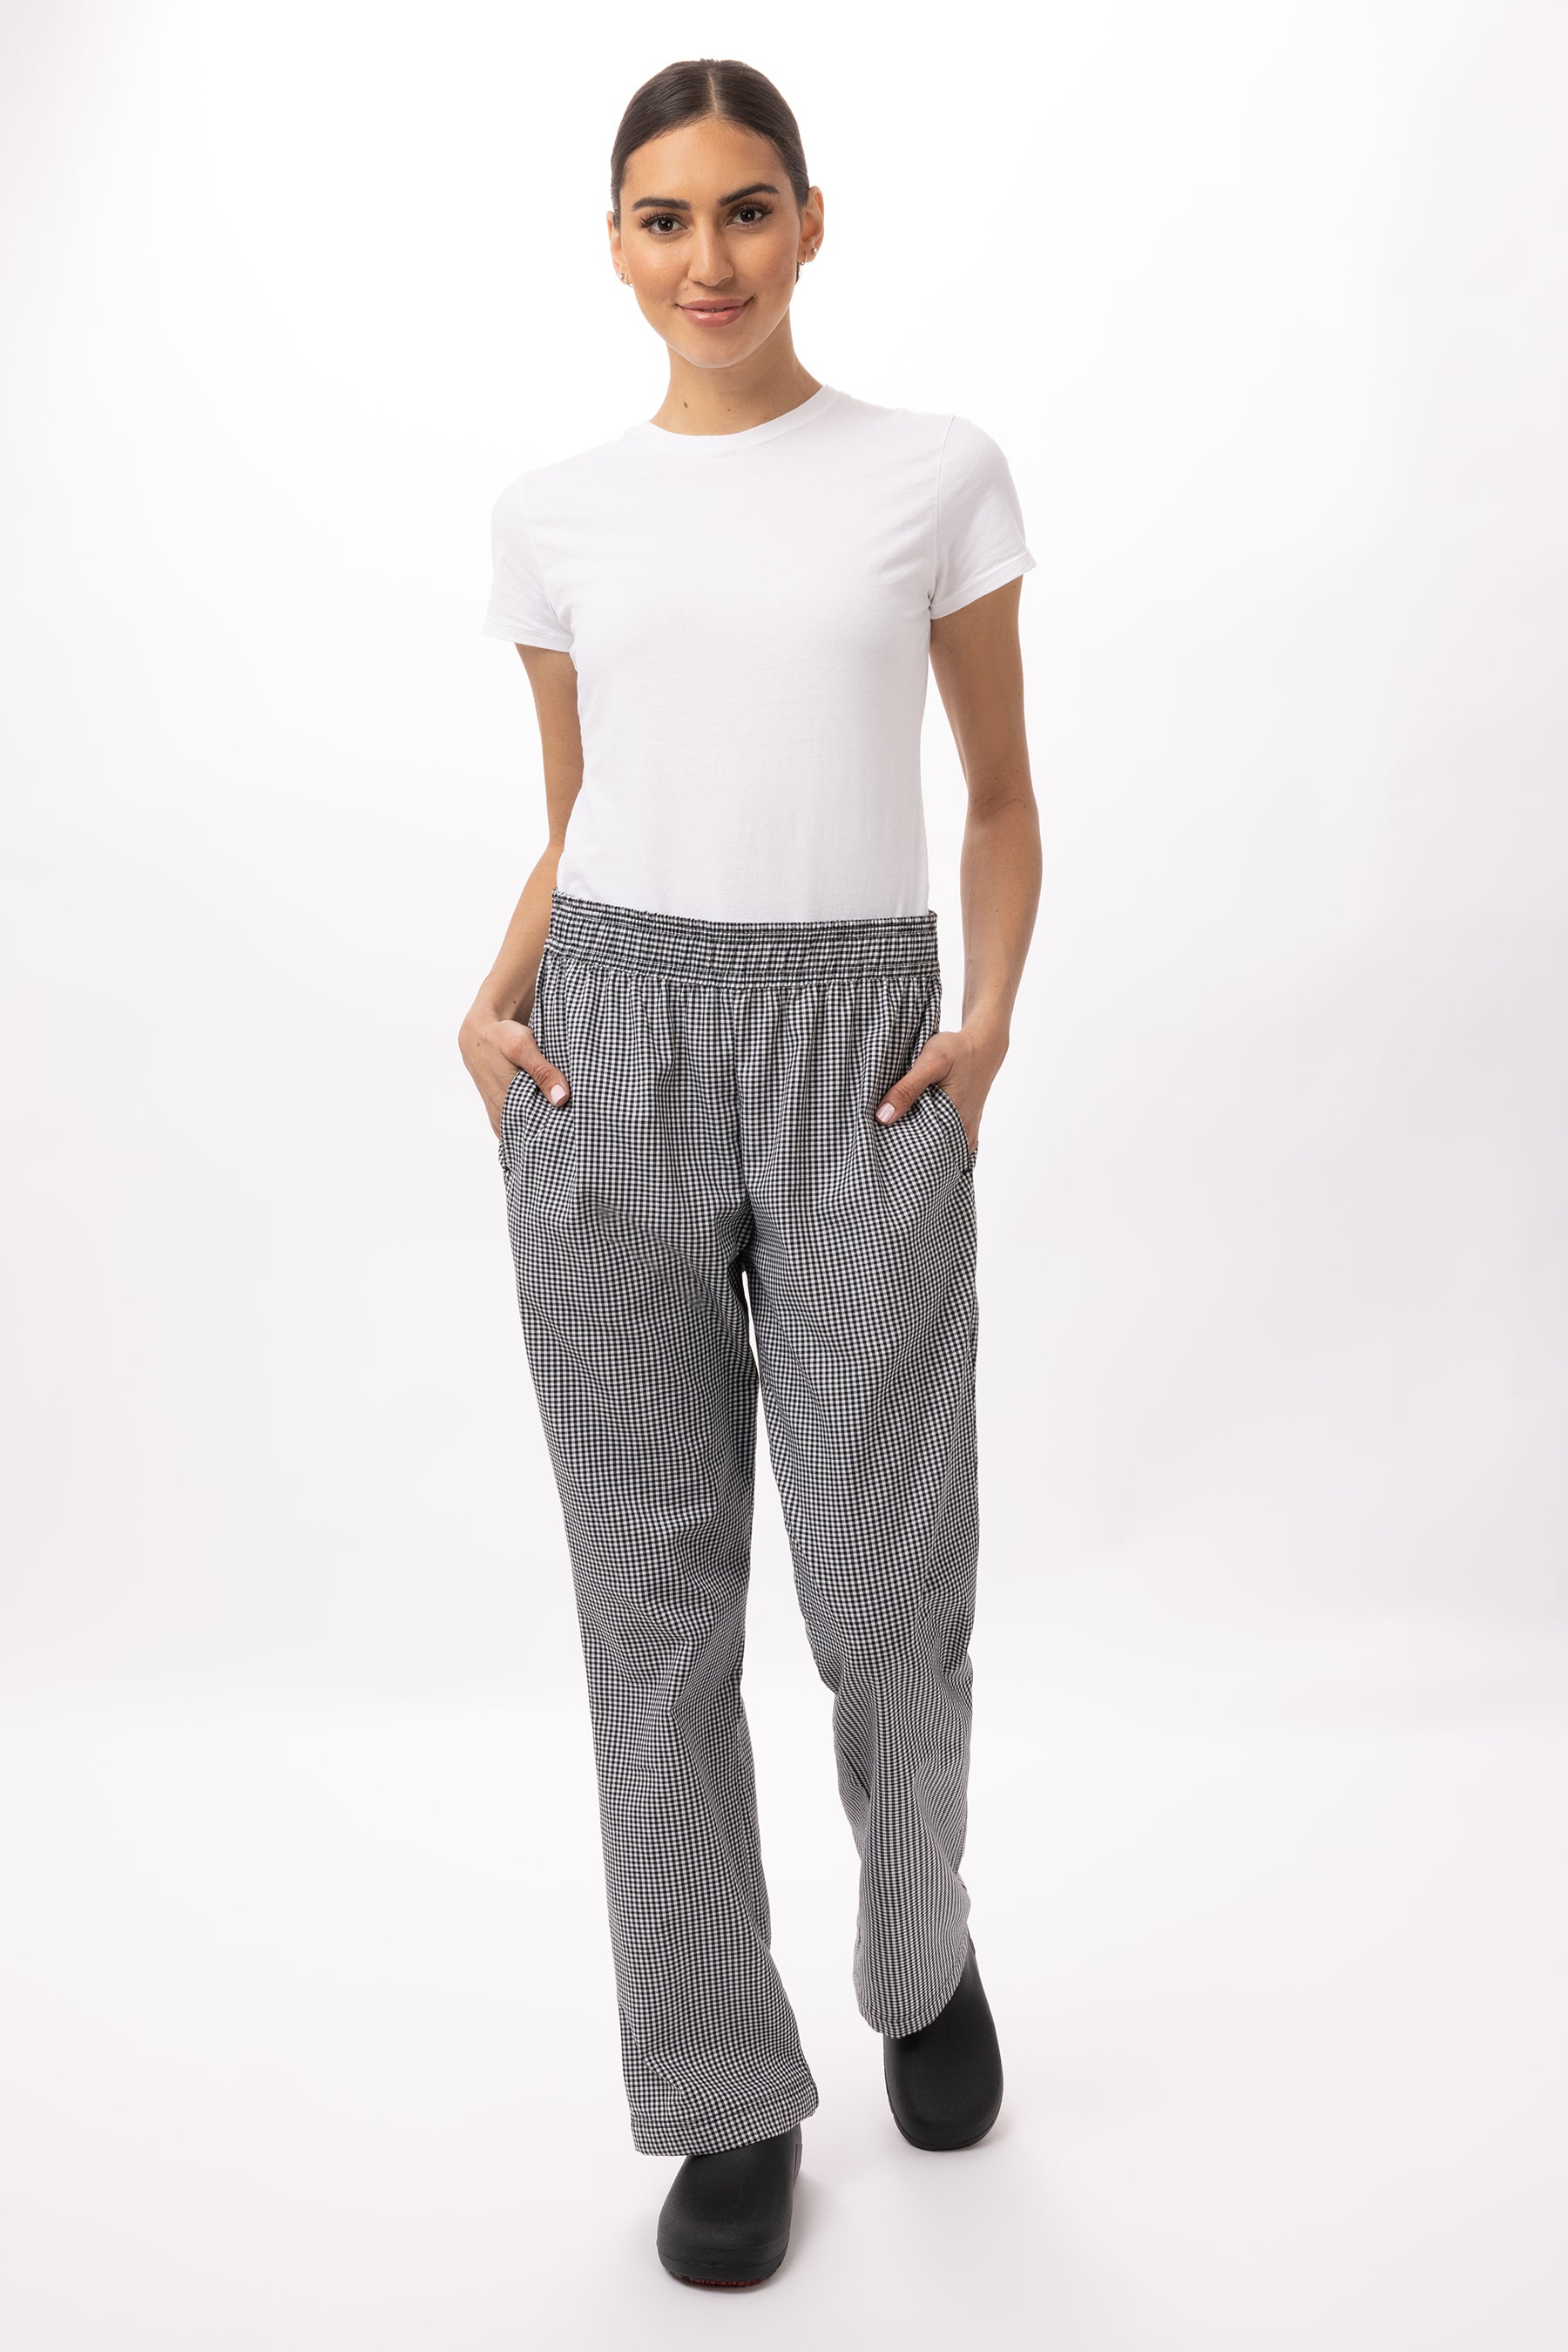 ESSENTIAL BAGGY CHEF PANTS WOMENS - 0